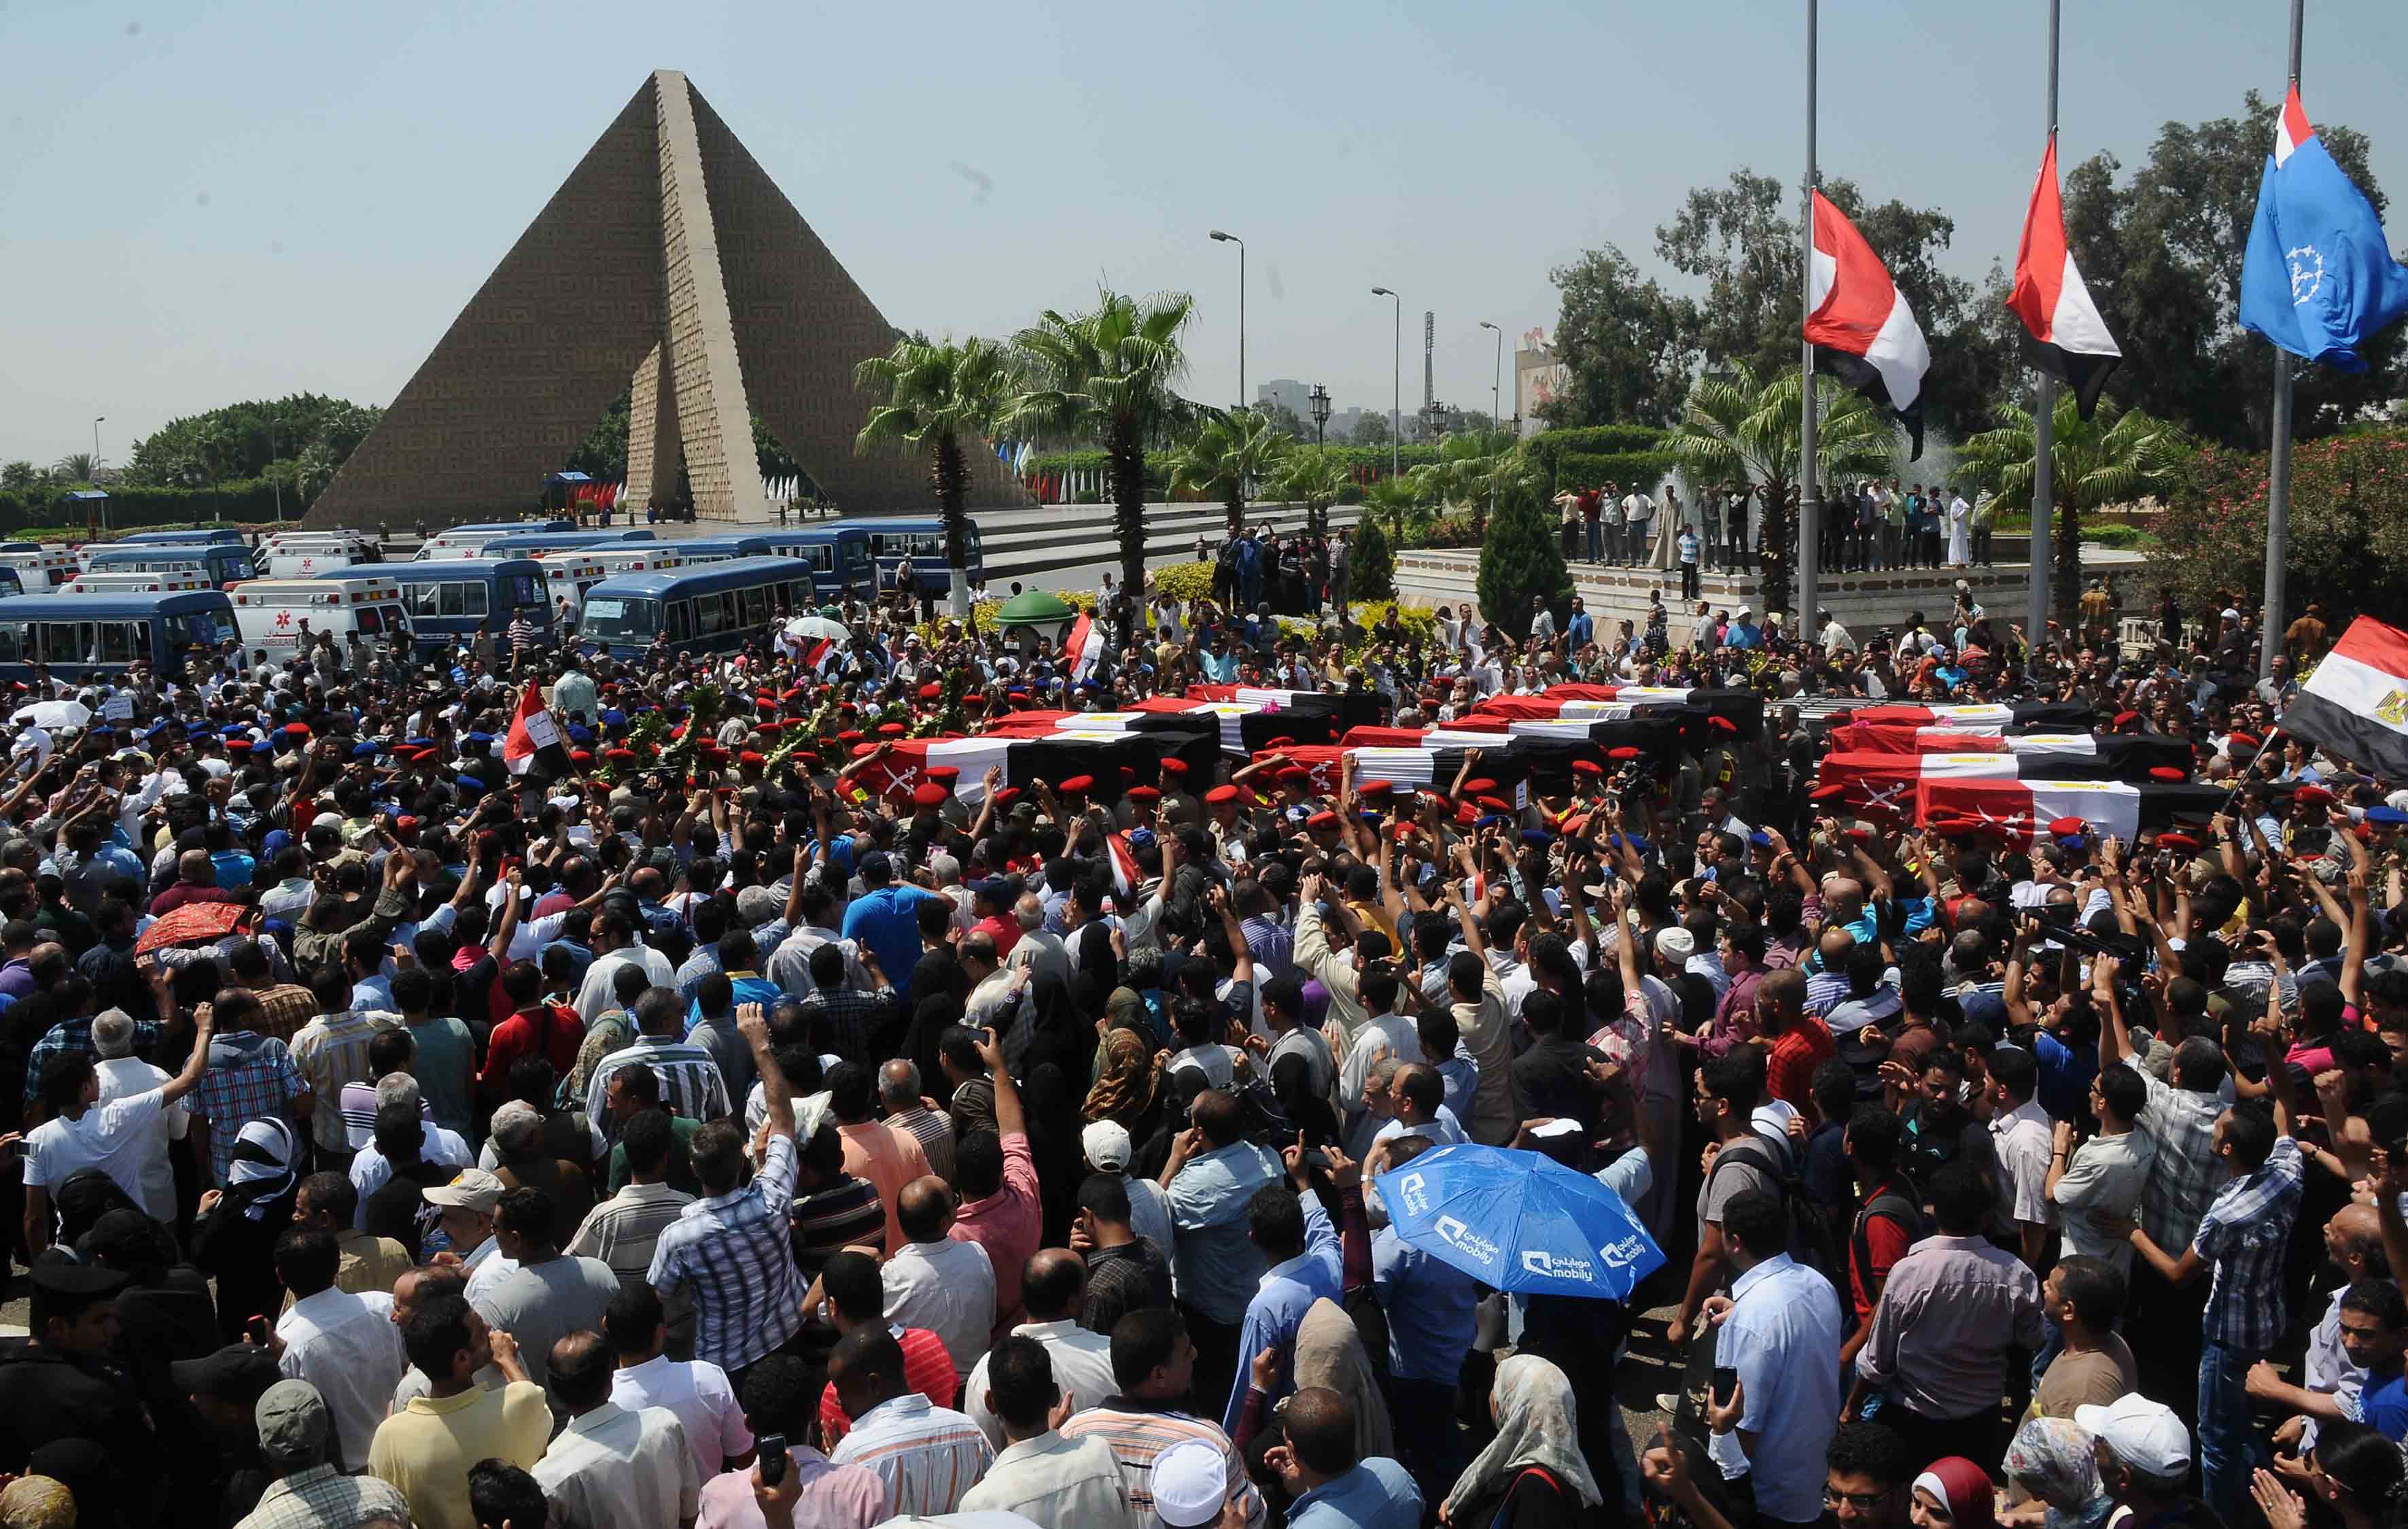 Border guards funeral procession at Naser City turned into a protest - Mohamed Omar